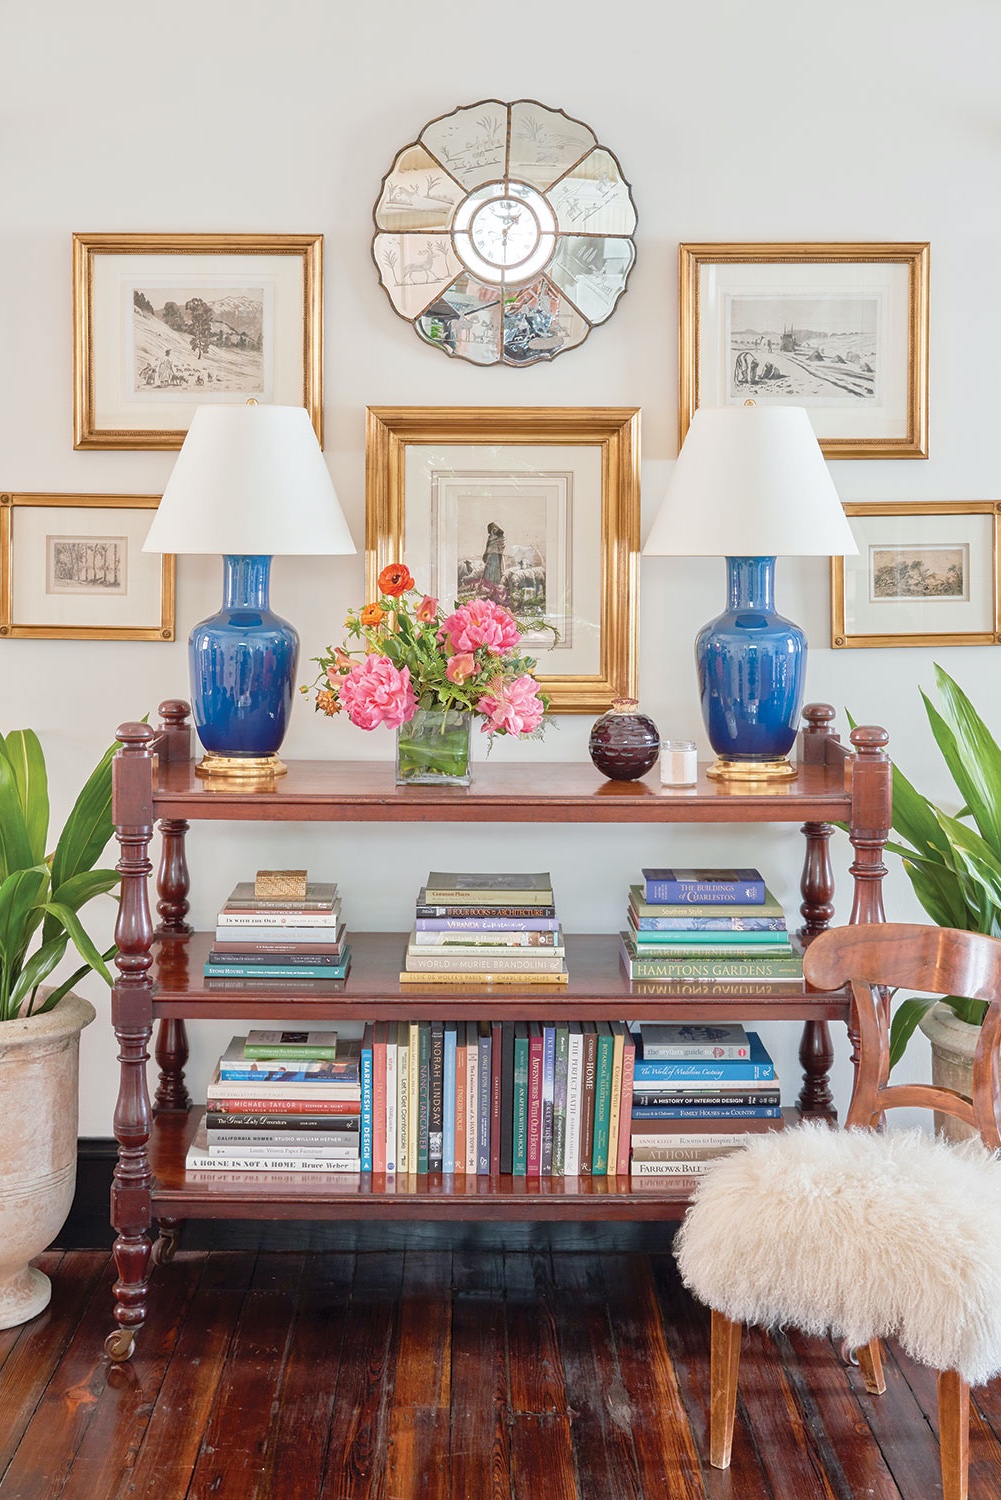 A pair of Christopher Spitzmiller lamps alongside old-world etchings and a collection of design books create a symmetrical vignette in Tammy Connor’s Charleston studio